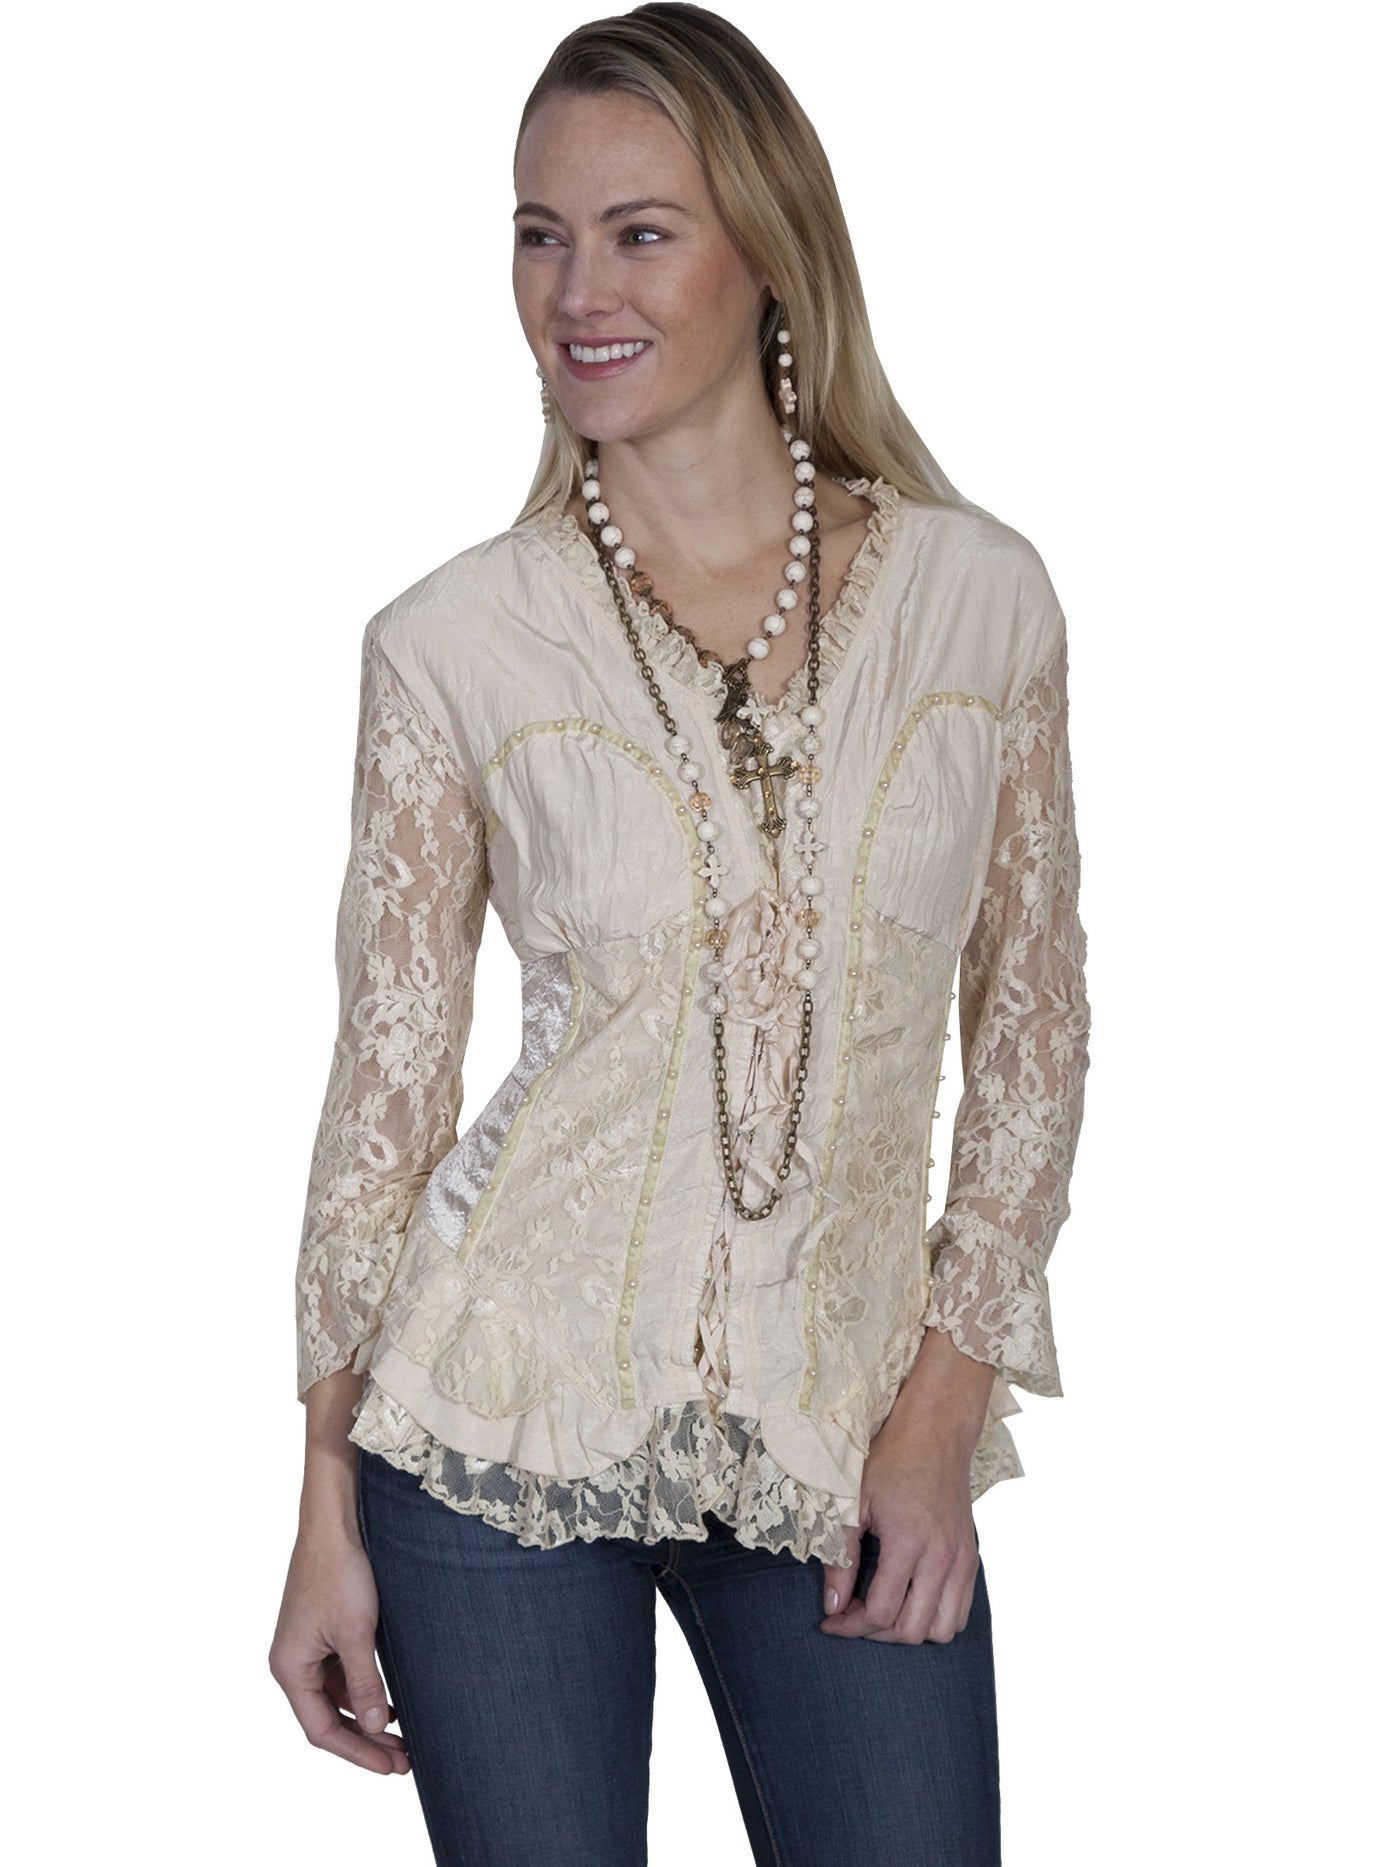 Desert Rider Lace Blouse in Camel - SOLD OUT